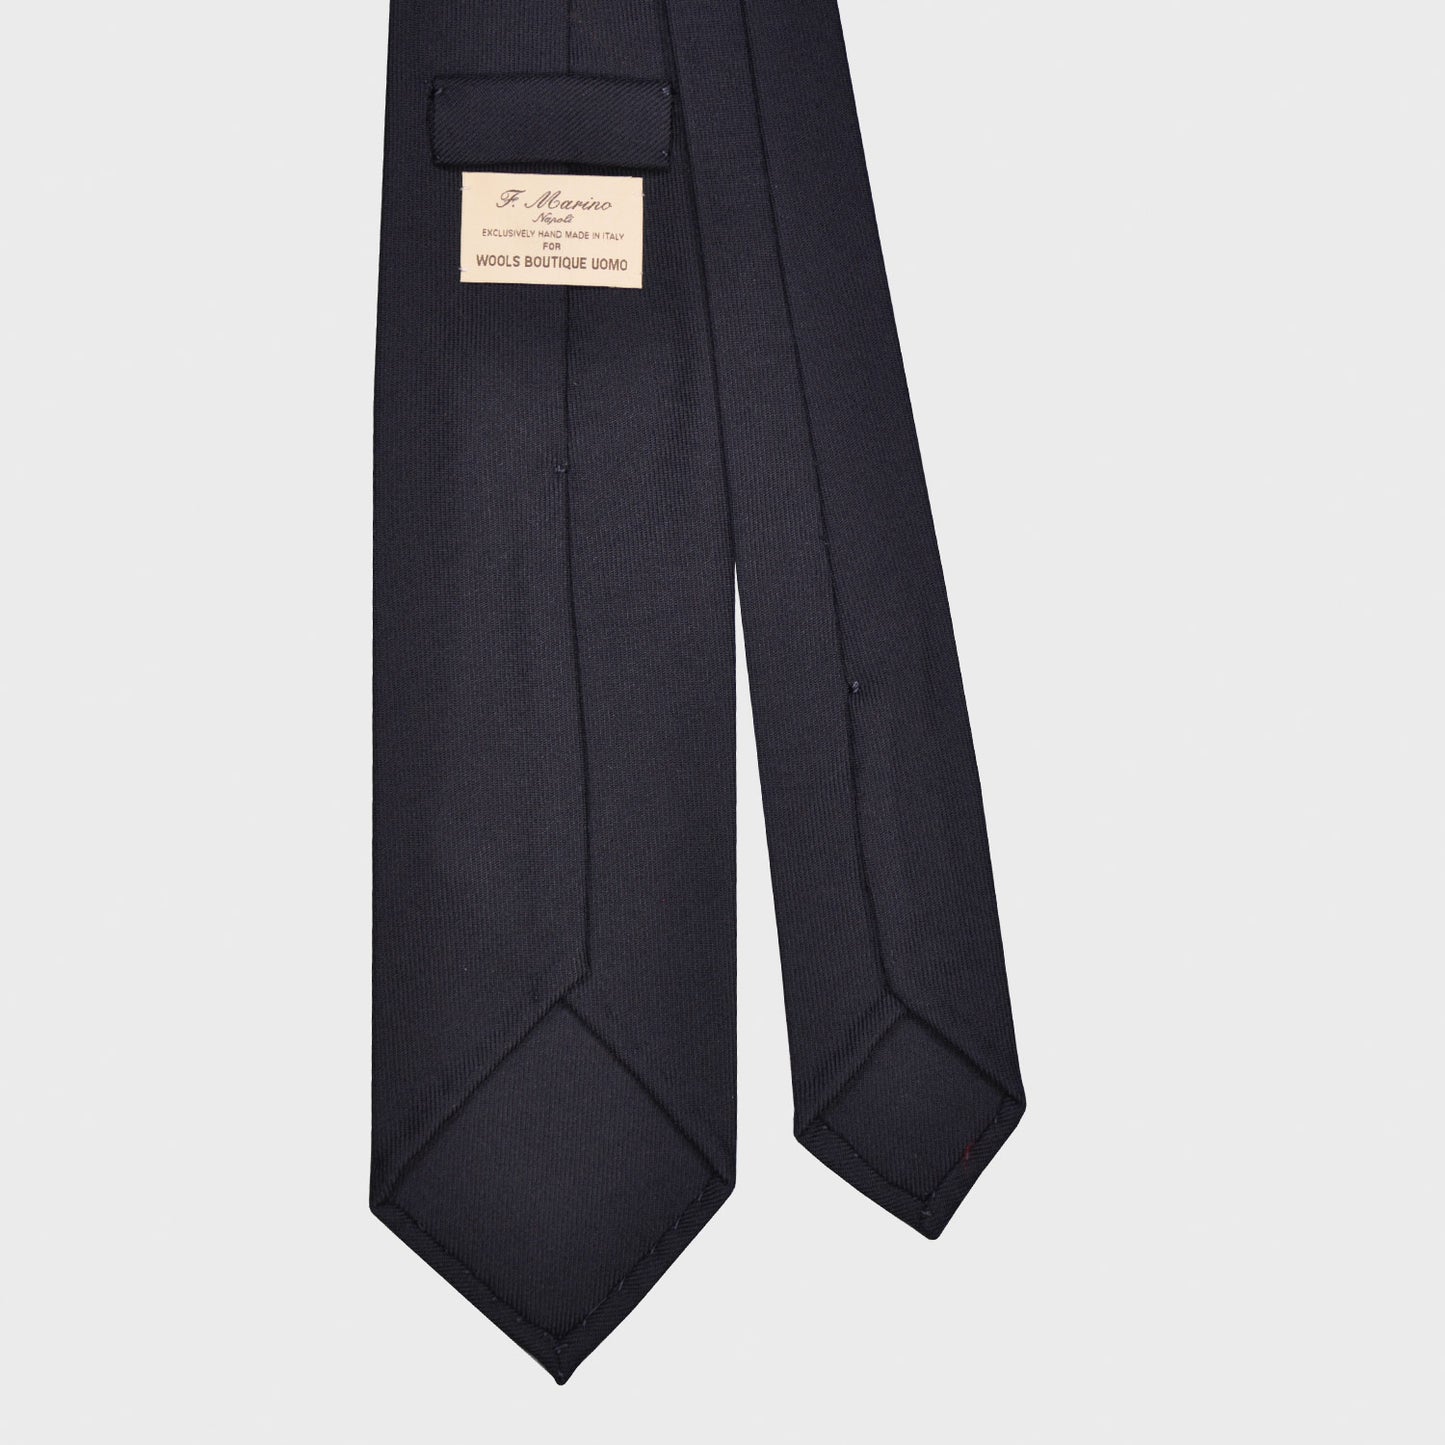 Load image into Gallery viewer, F.Marino Twill Wool Tie 3 Folds Blue-Wools Boutique Uomo
